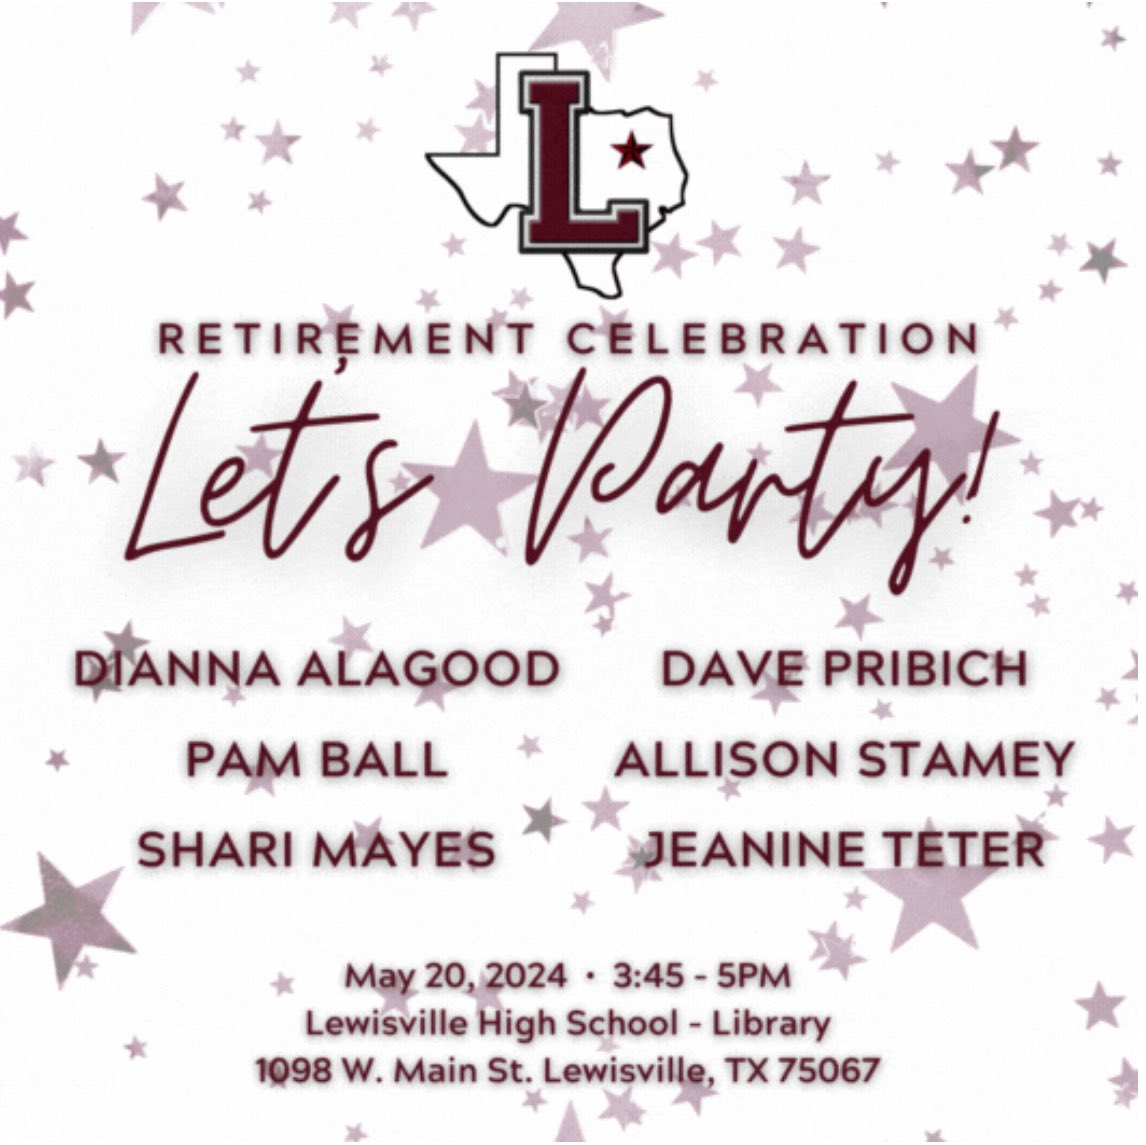 Come celebrate with us tomorrow! Thank you to our retiring teachers!